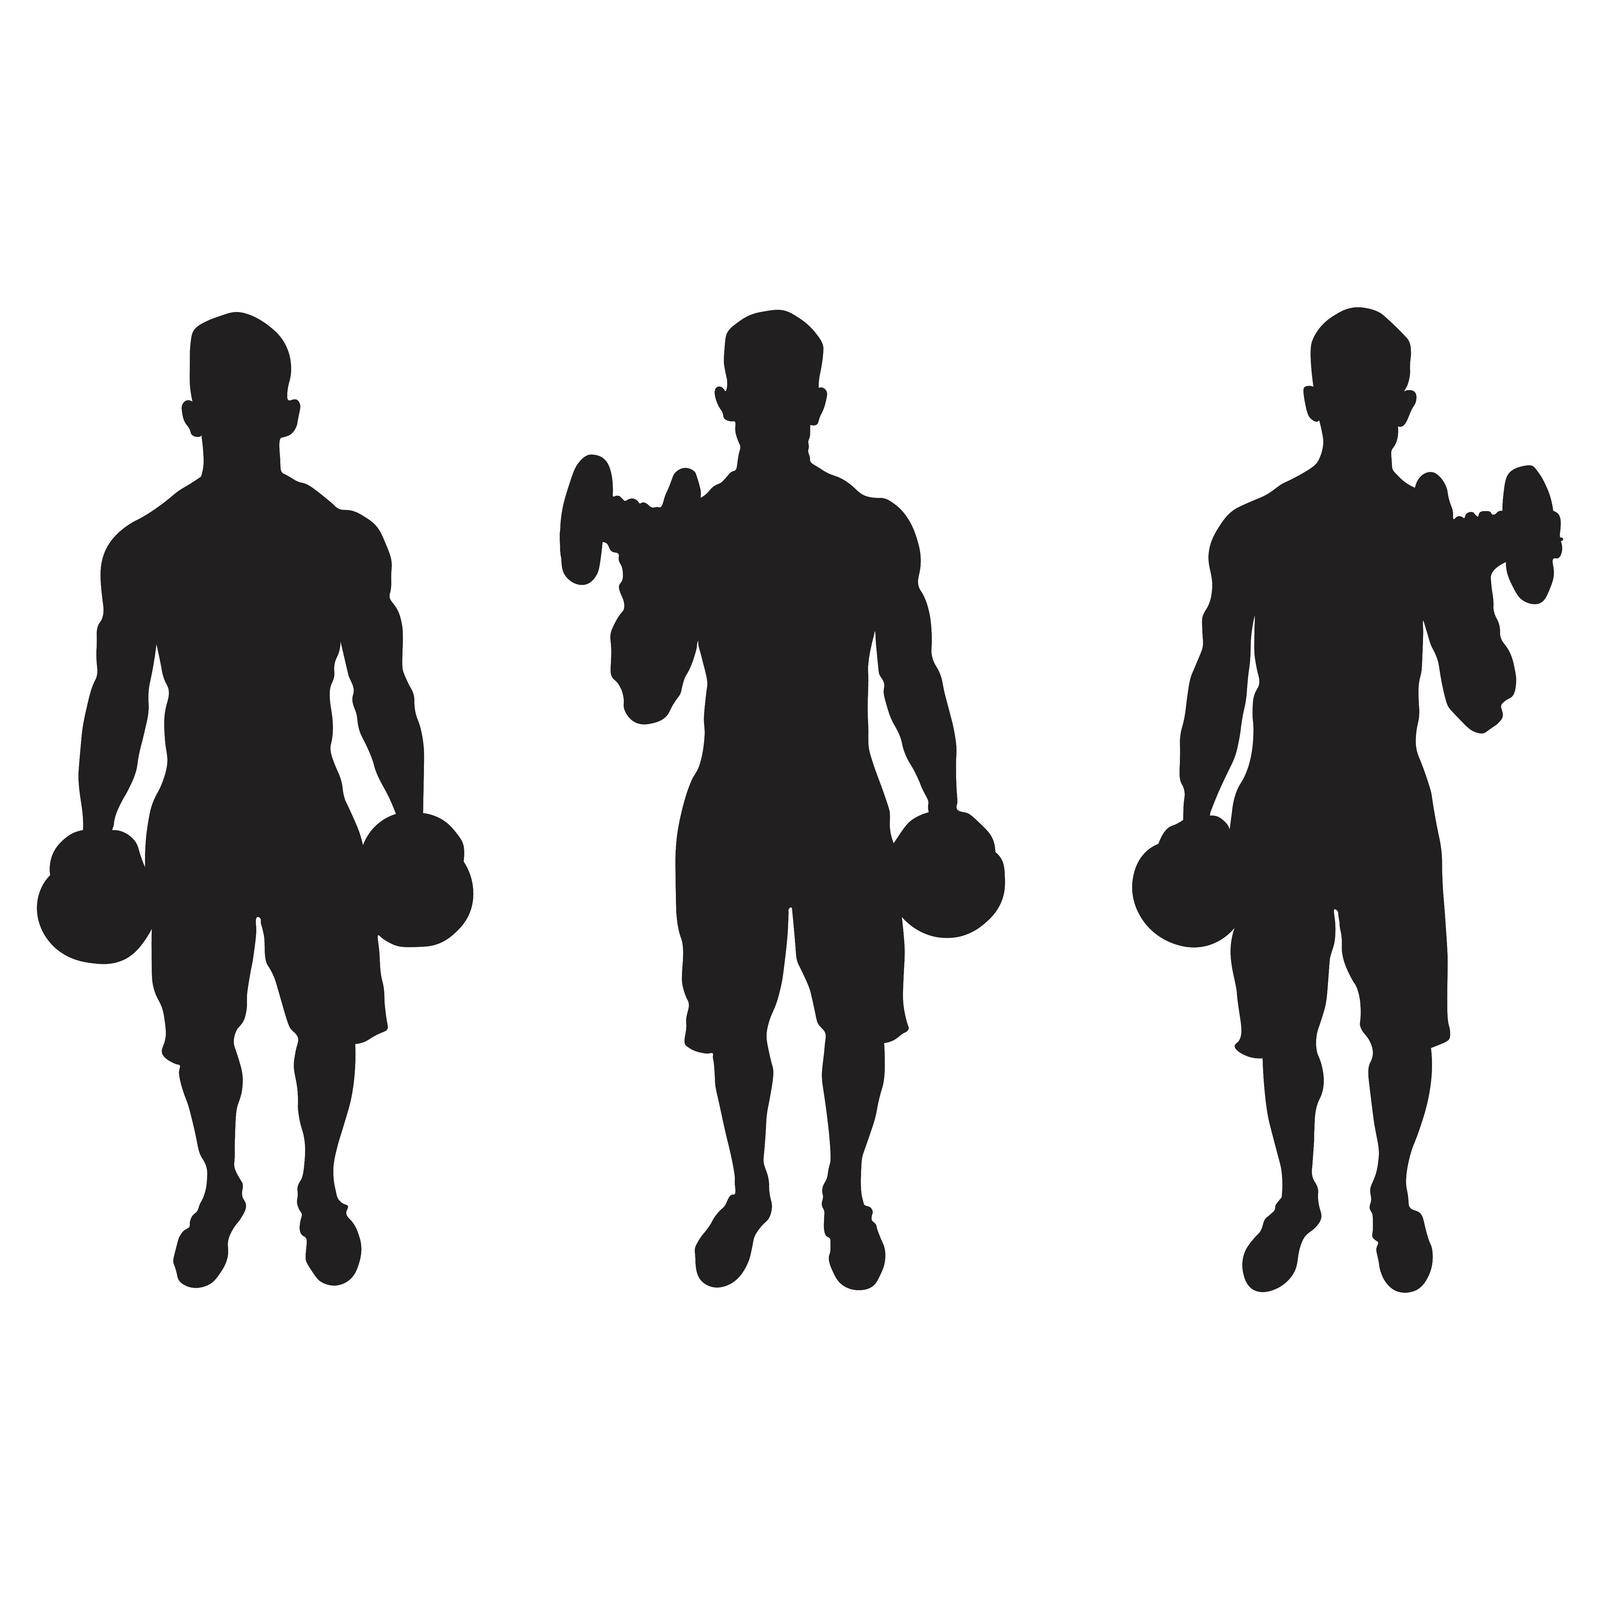 A set of silhouette depicting man doing alternating bicep curls arm exercise isolated on a white background. EPS Vector